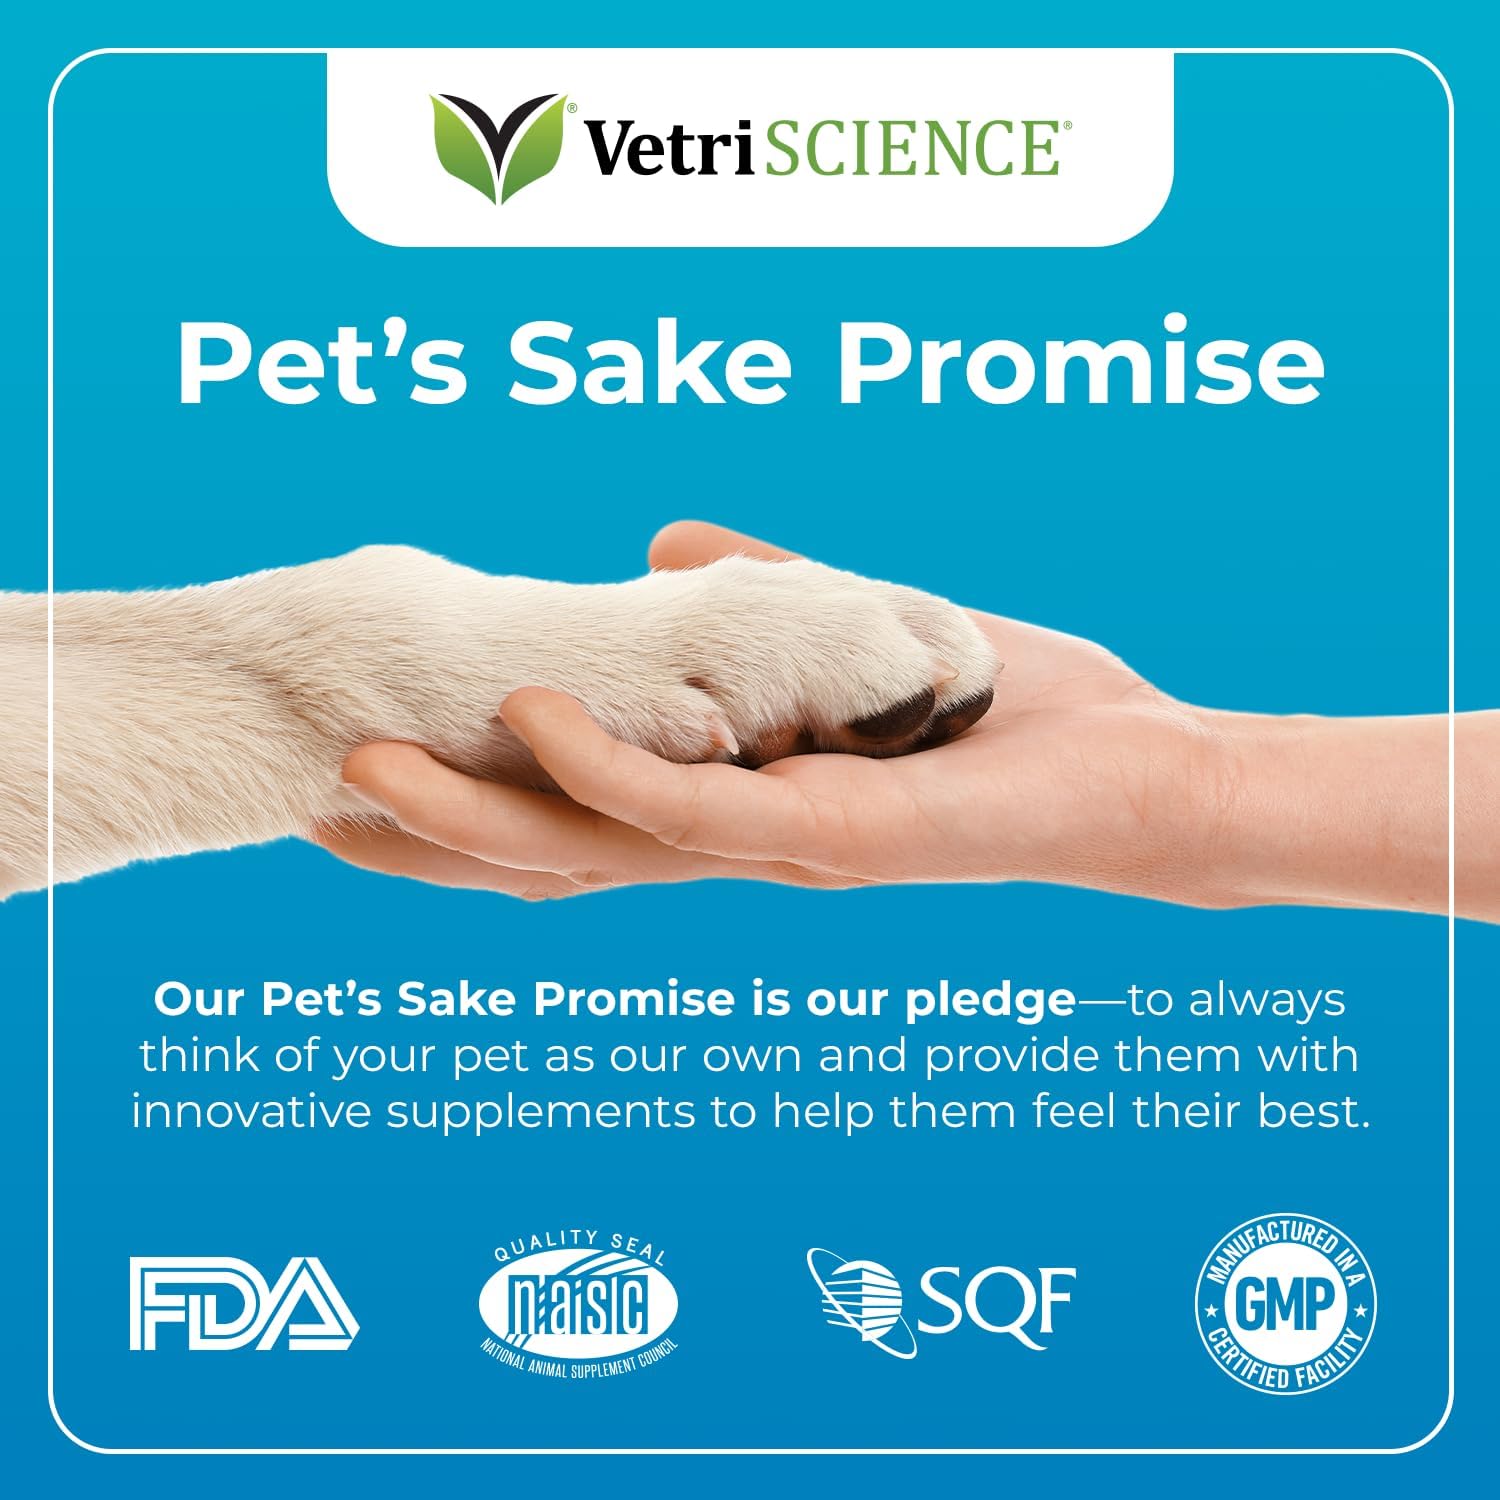 VETRISCIENCE Composure Calming Treats for Small Dogs Dealing with Anxiety, Separation Stress, Noise, Thunder and Barking - Yummy Flavored Chews Pets Love, 30 Chews : Pet Relaxants : Pet Supplies